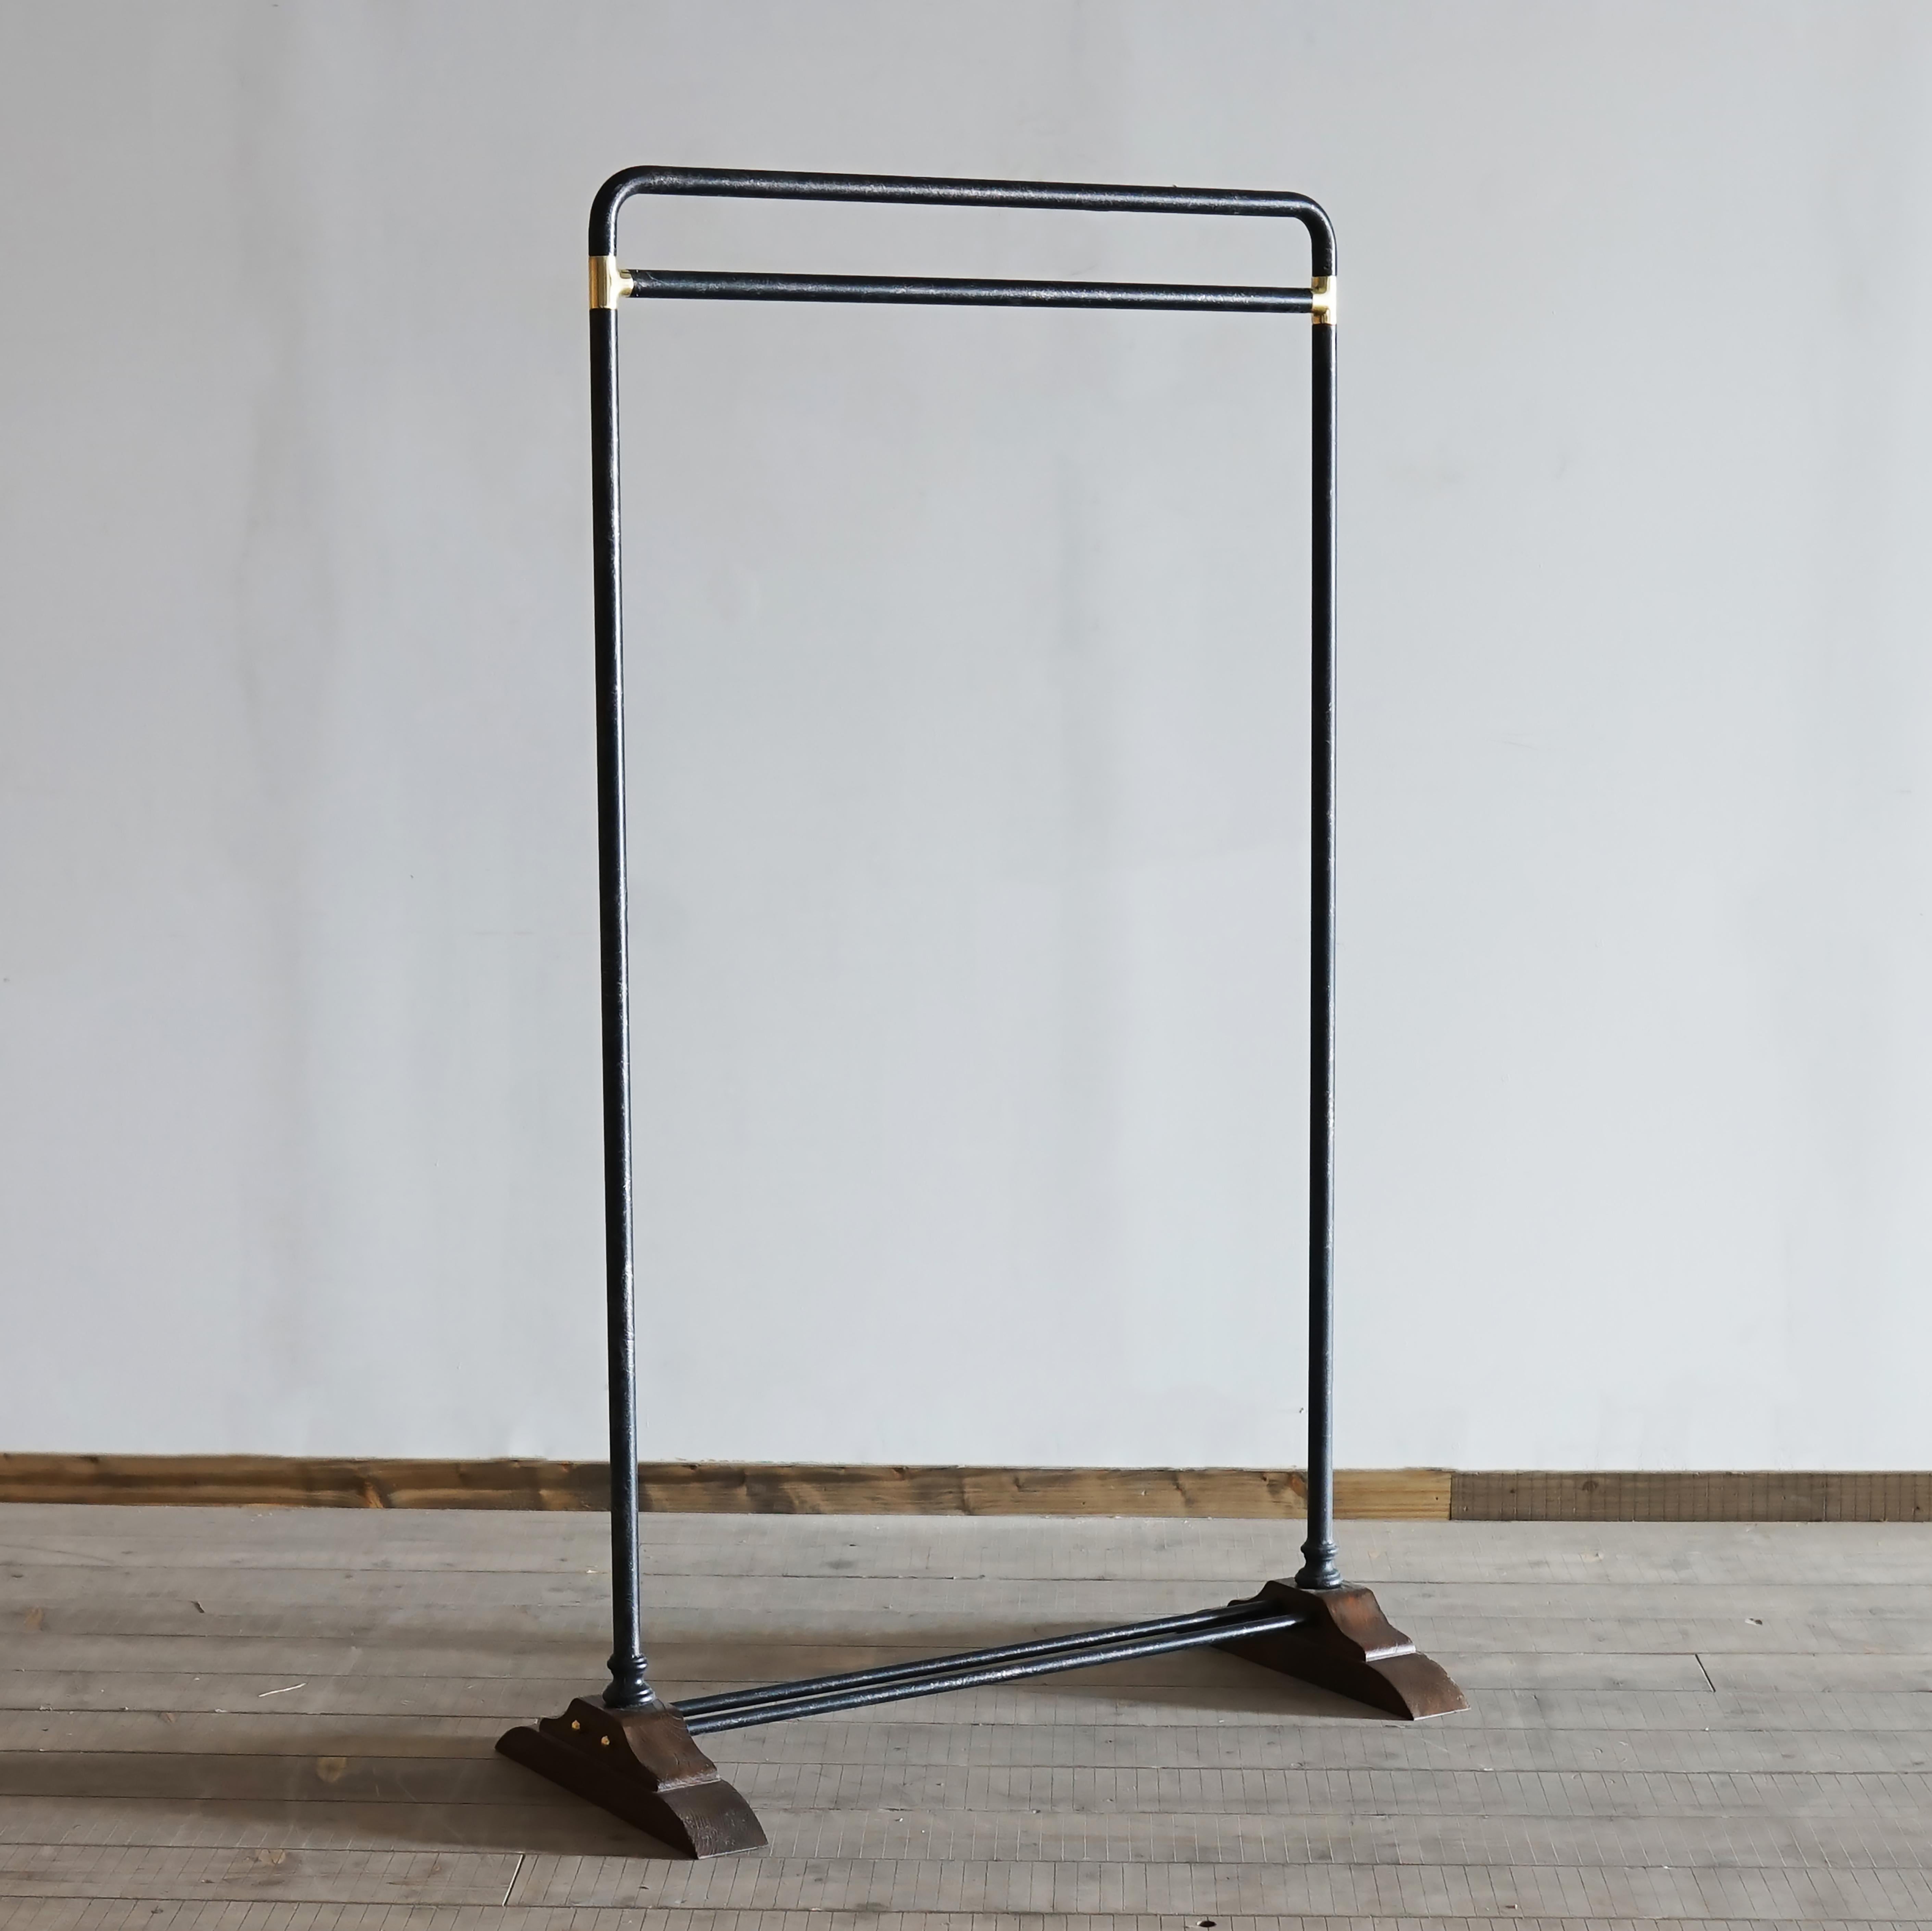 A hanger rack with a subtle character and presence that blends in with everyday life. The simplicity of the form and the combination of different materials create a unique atmosphere. The stylish design does not interfere with the interior design of